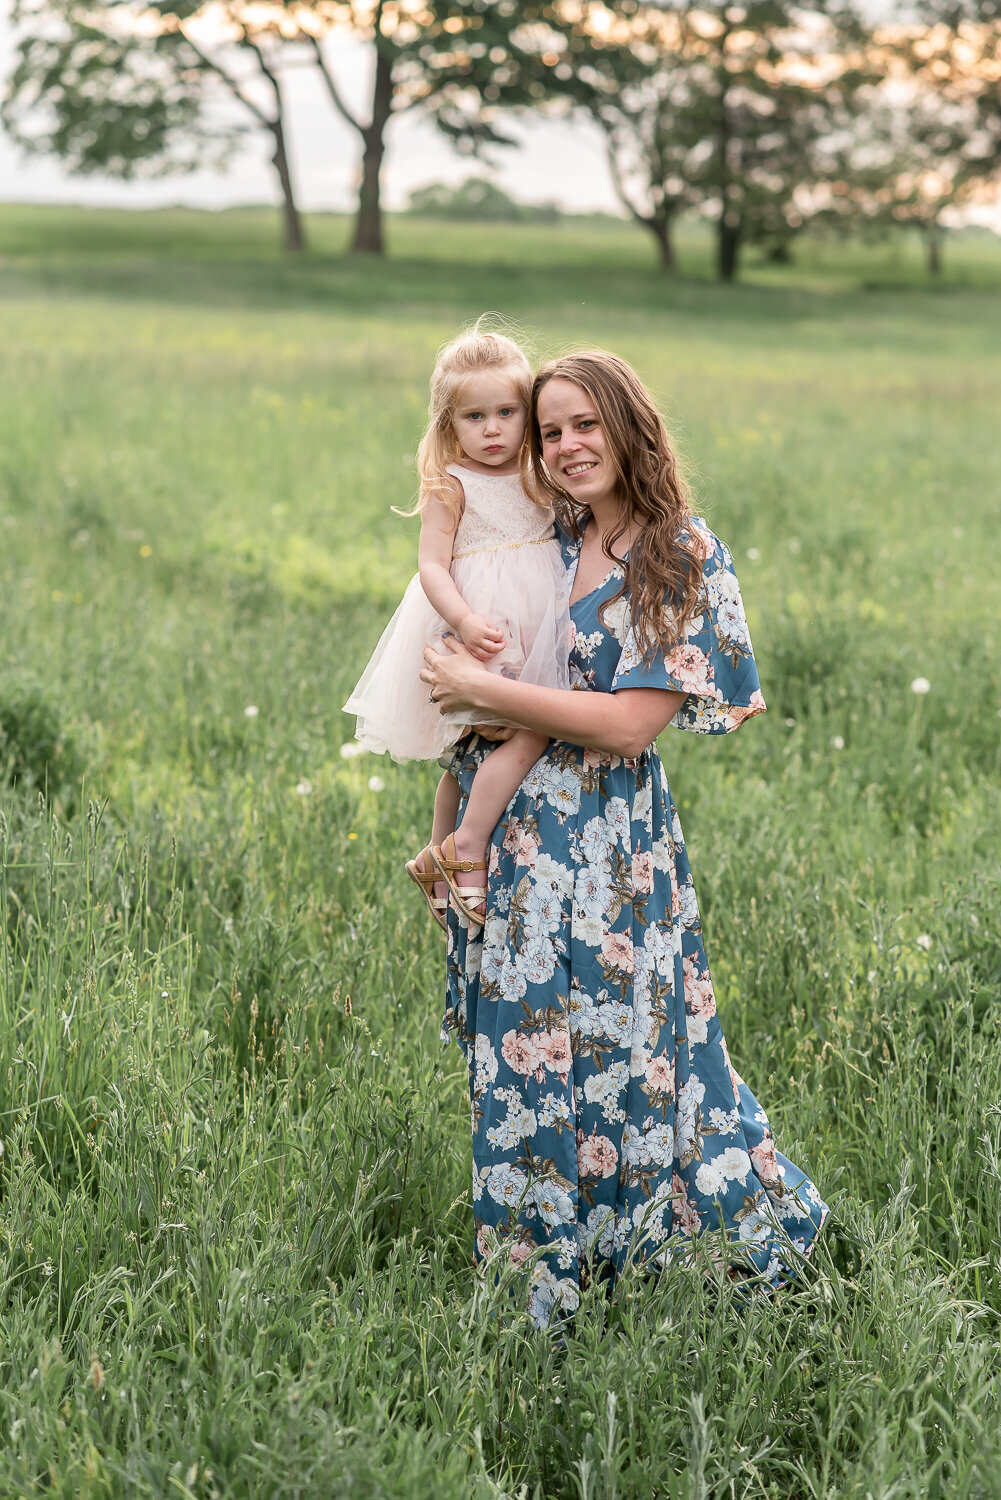 Mother and daughter smiling at camera in field at sunset |Sharon Leger Photography, Canton, Connecticut | CT Newborn and Family Photographer